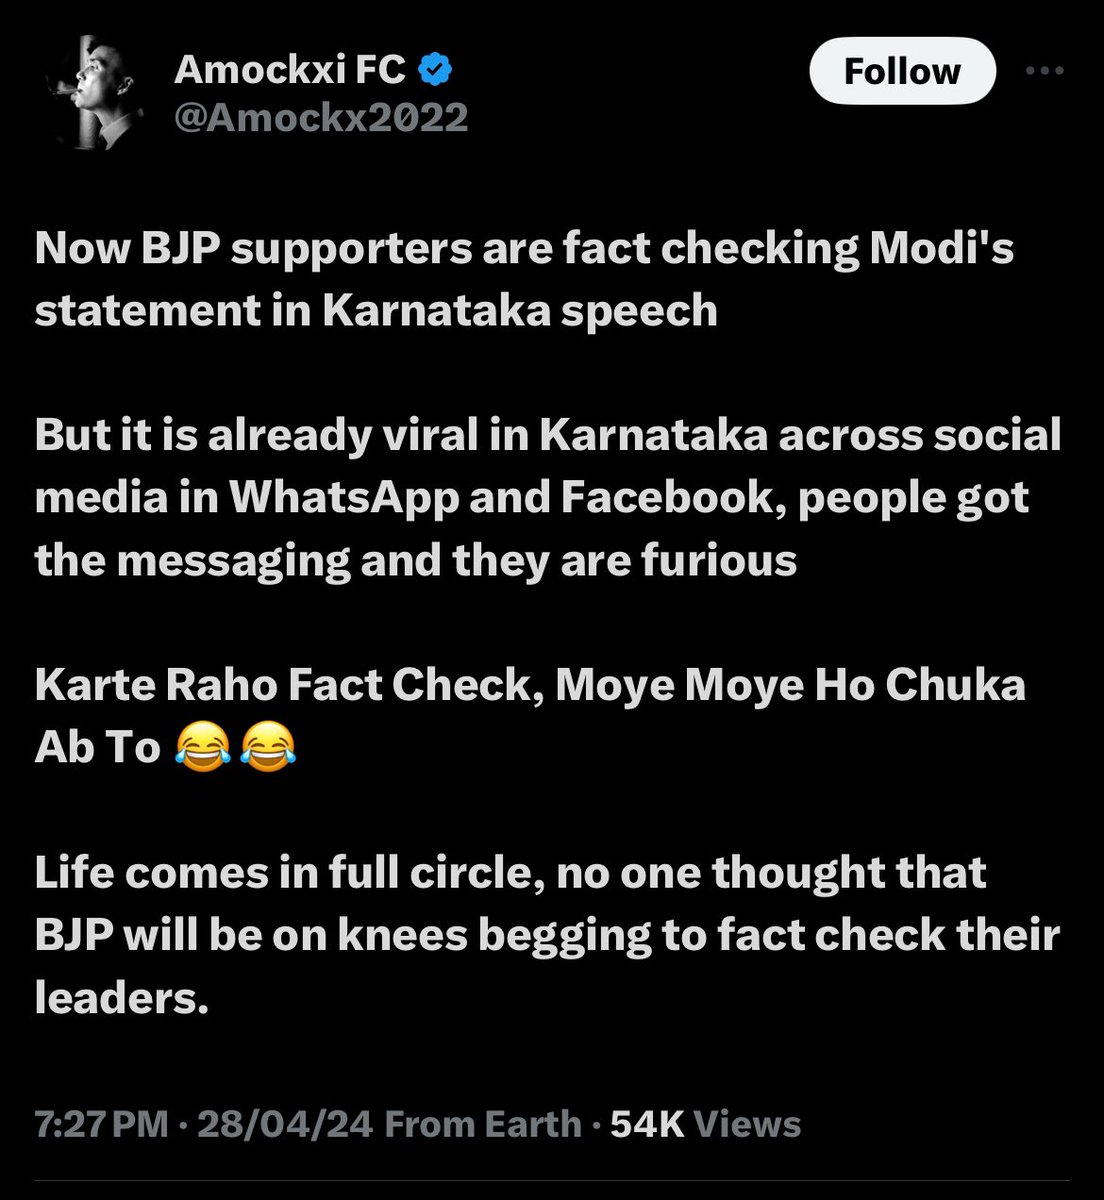 Look how shameless Congress IT cell is! They are spreading fake news deliberately and also celebrating their success! The government must take strict action on people like this.